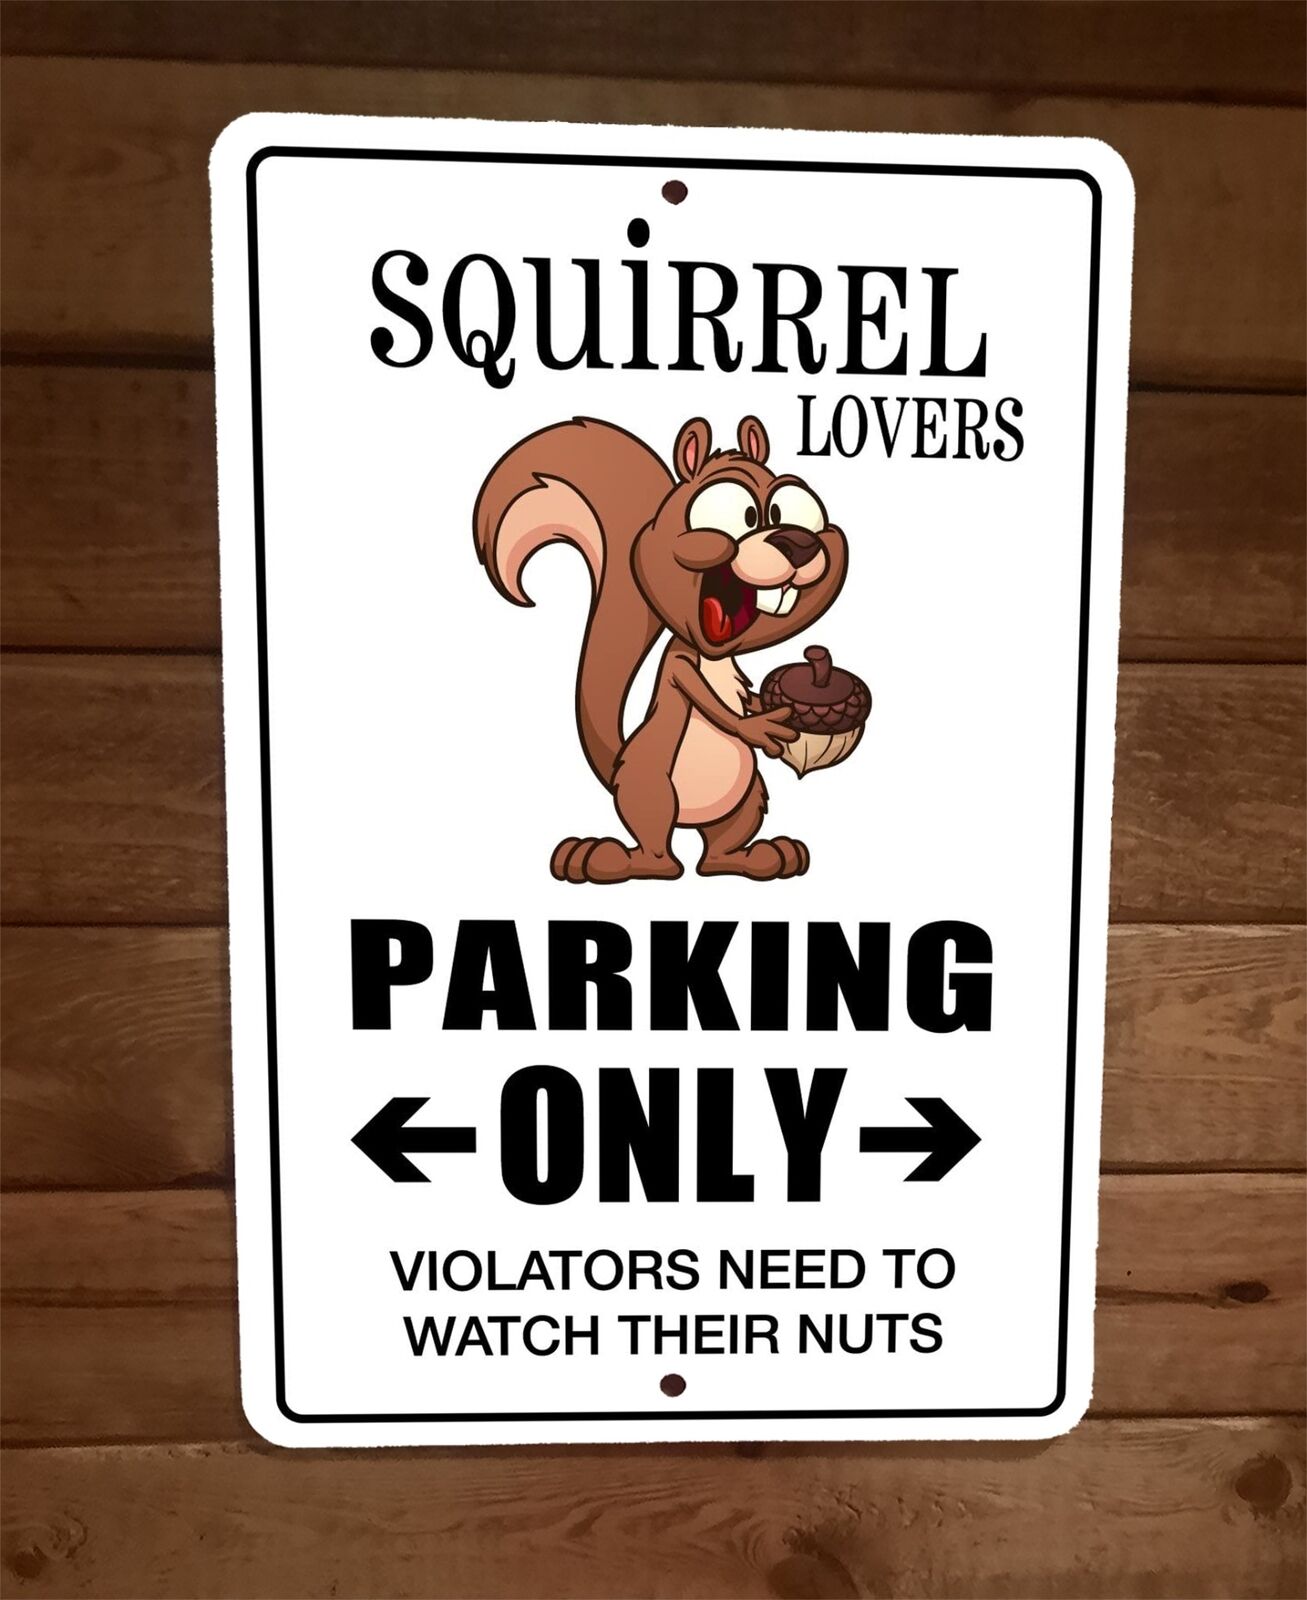 Squirrel Lovers Parking Only 8x12 Metal Wall Humorous Animal Sign